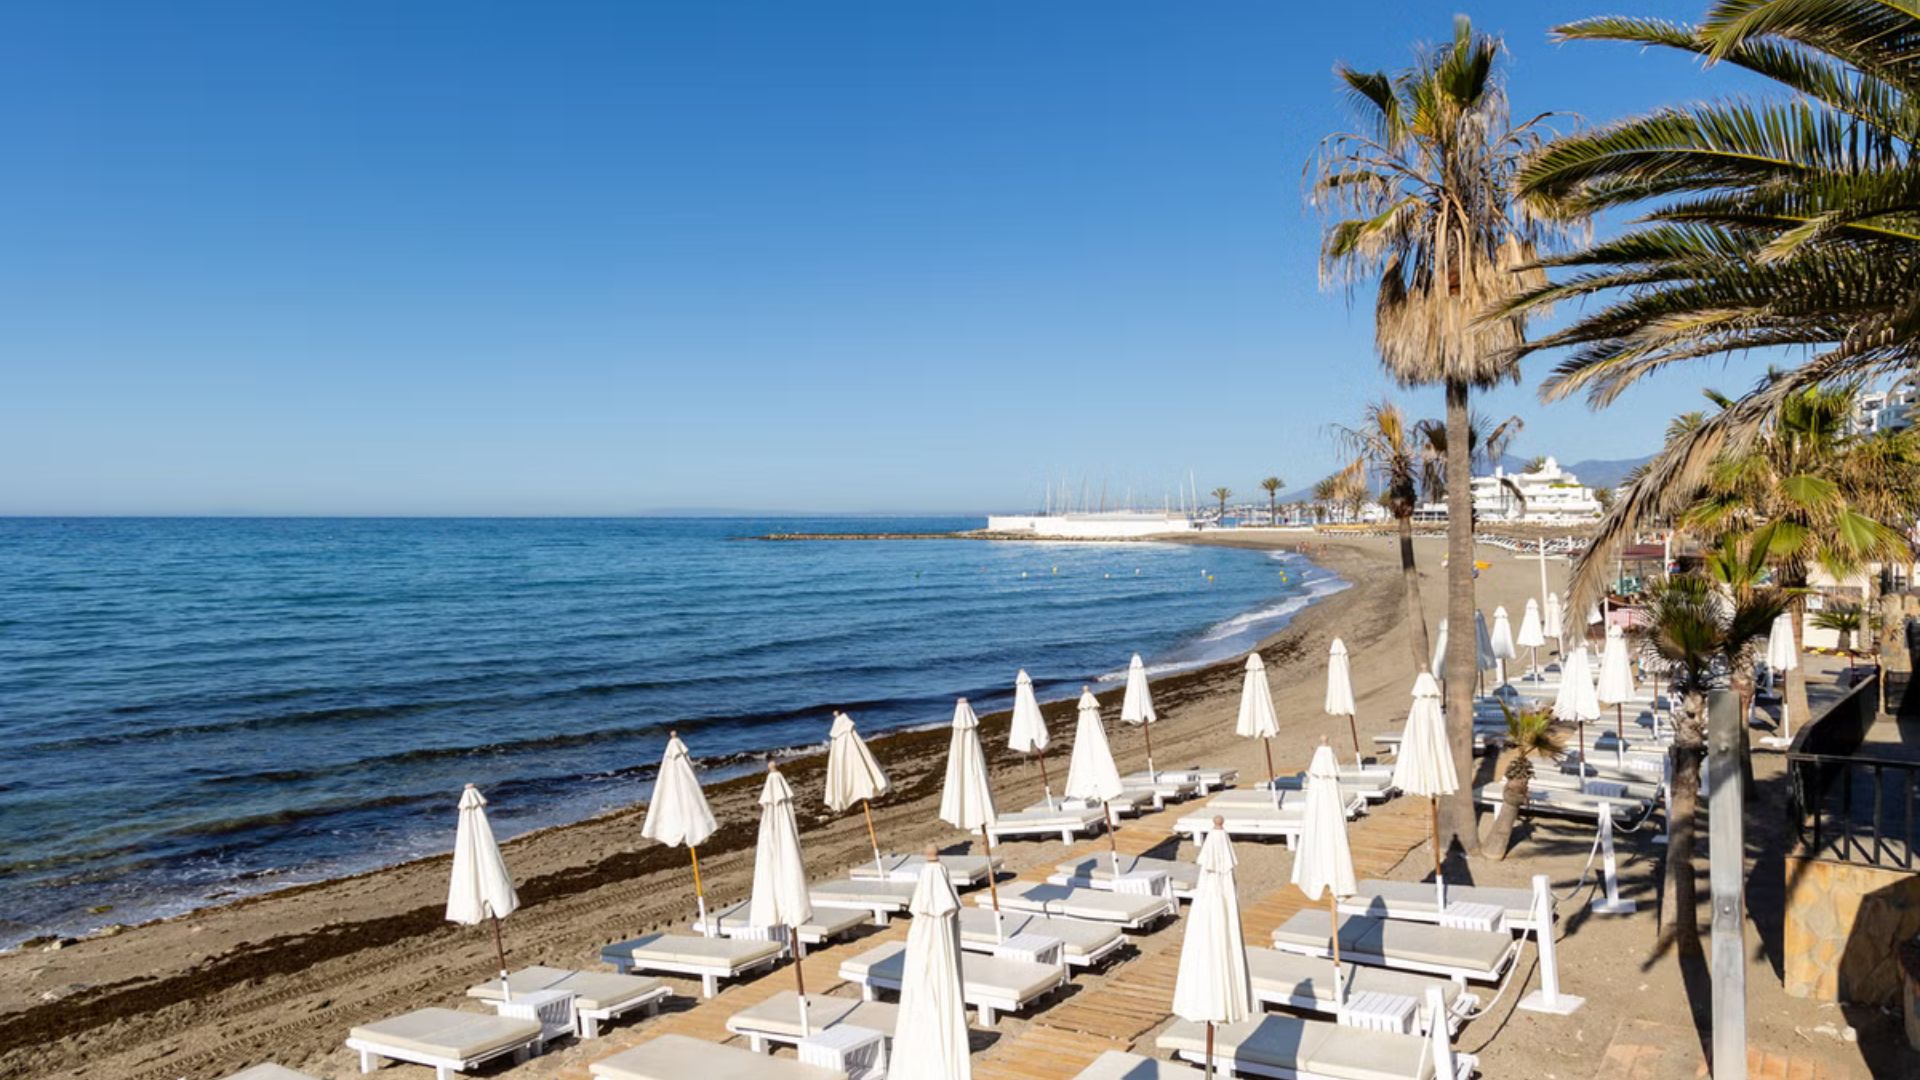 Spanish City Marbella Plans Rs 67,000 Fine For Urinating In Sea, Social Media Raises Enforcement Concerns